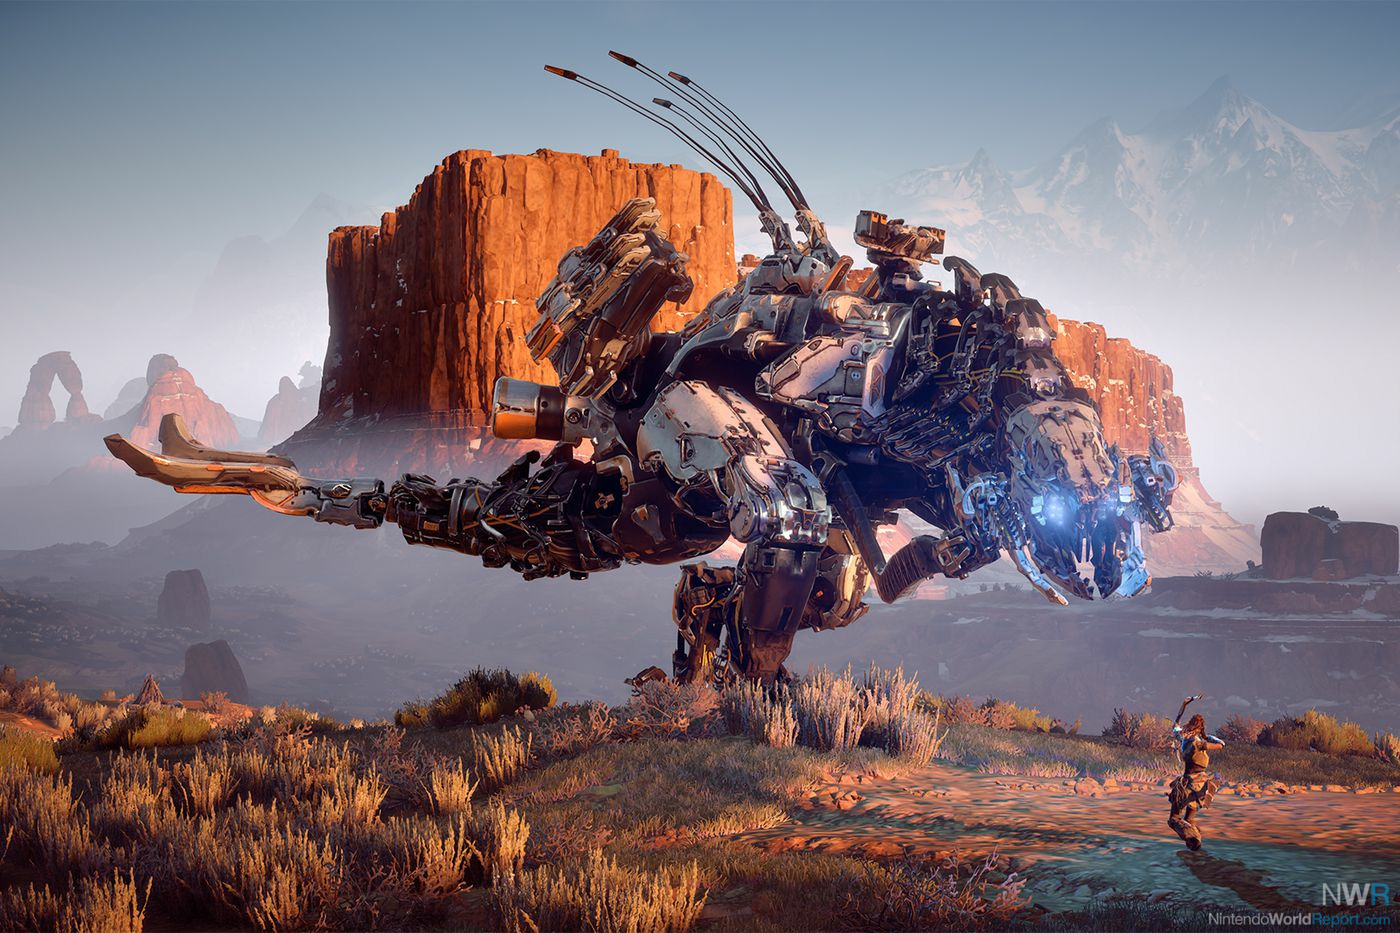 Horizon: Zero Dawn review – a stunning but barely evolved RPG contradiction, Games